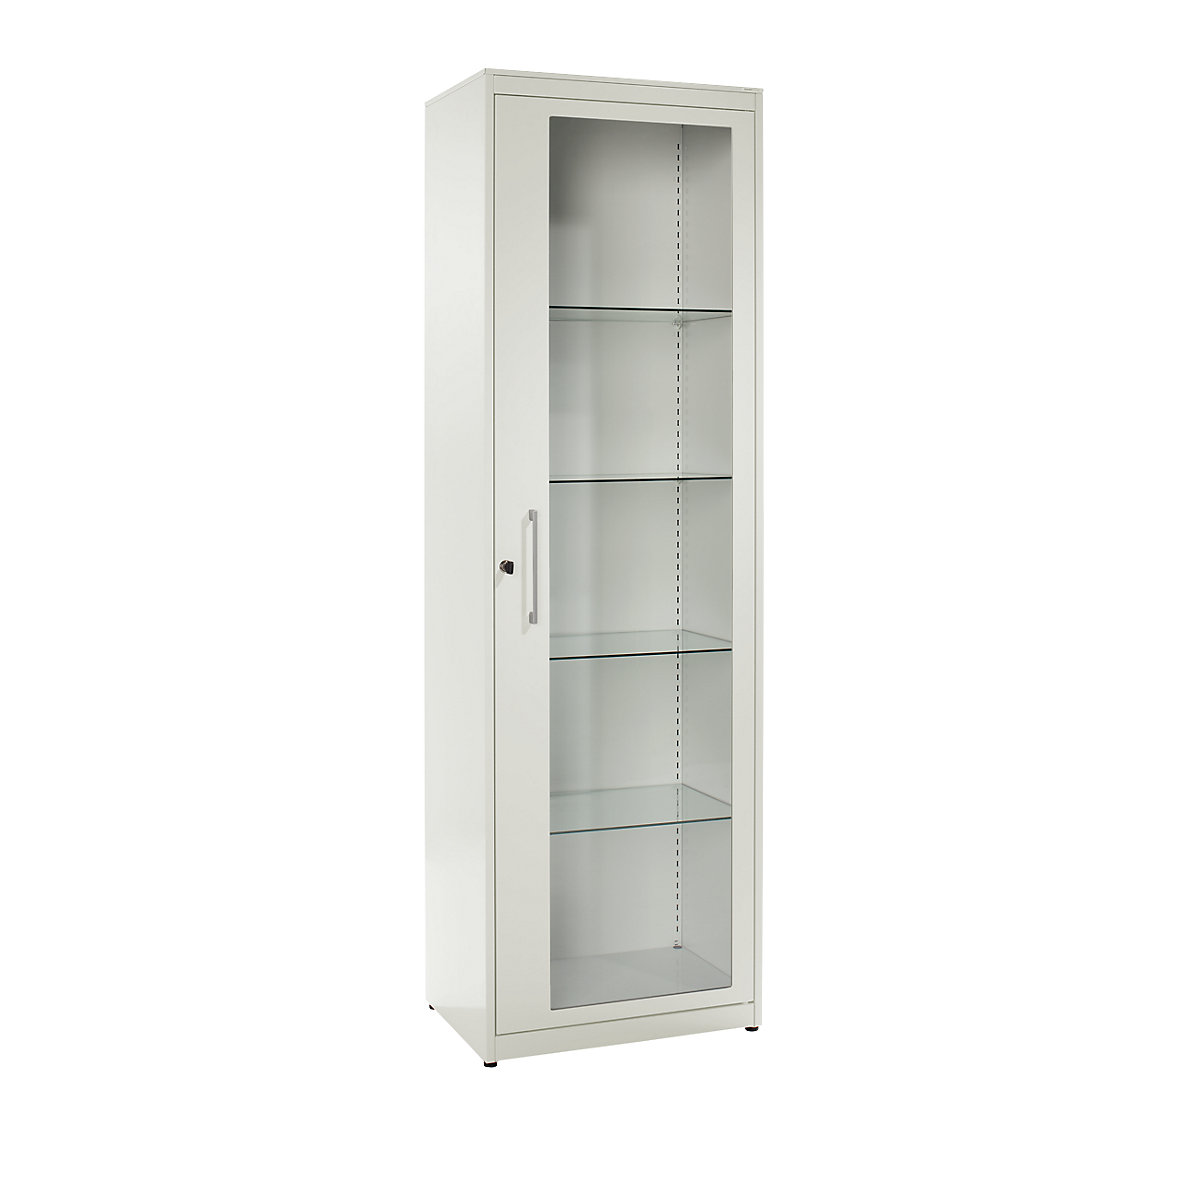 First aid cupboard – mauser, 1 hinged door, 4 shelves, pure white-4